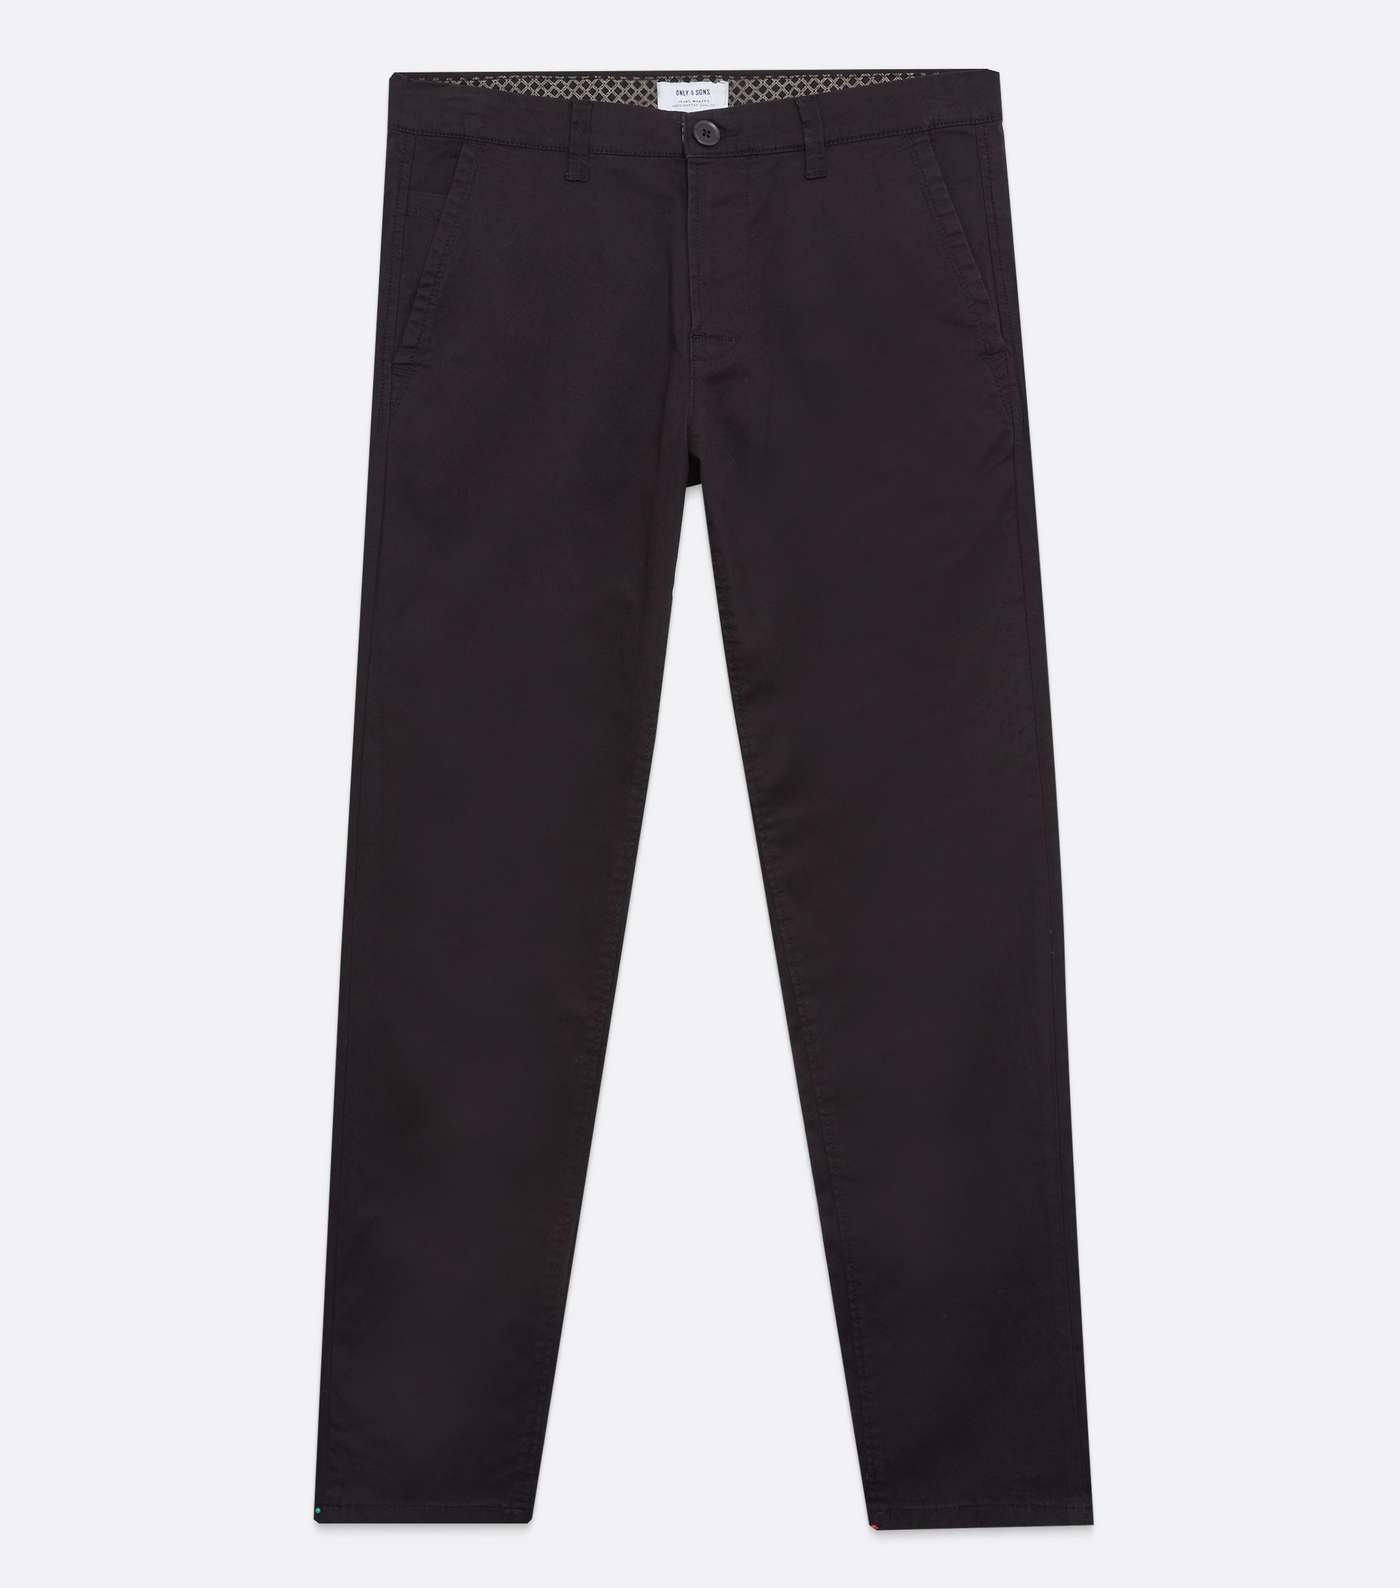 Only & Sons Black Skinny Fit Chinos Image 5